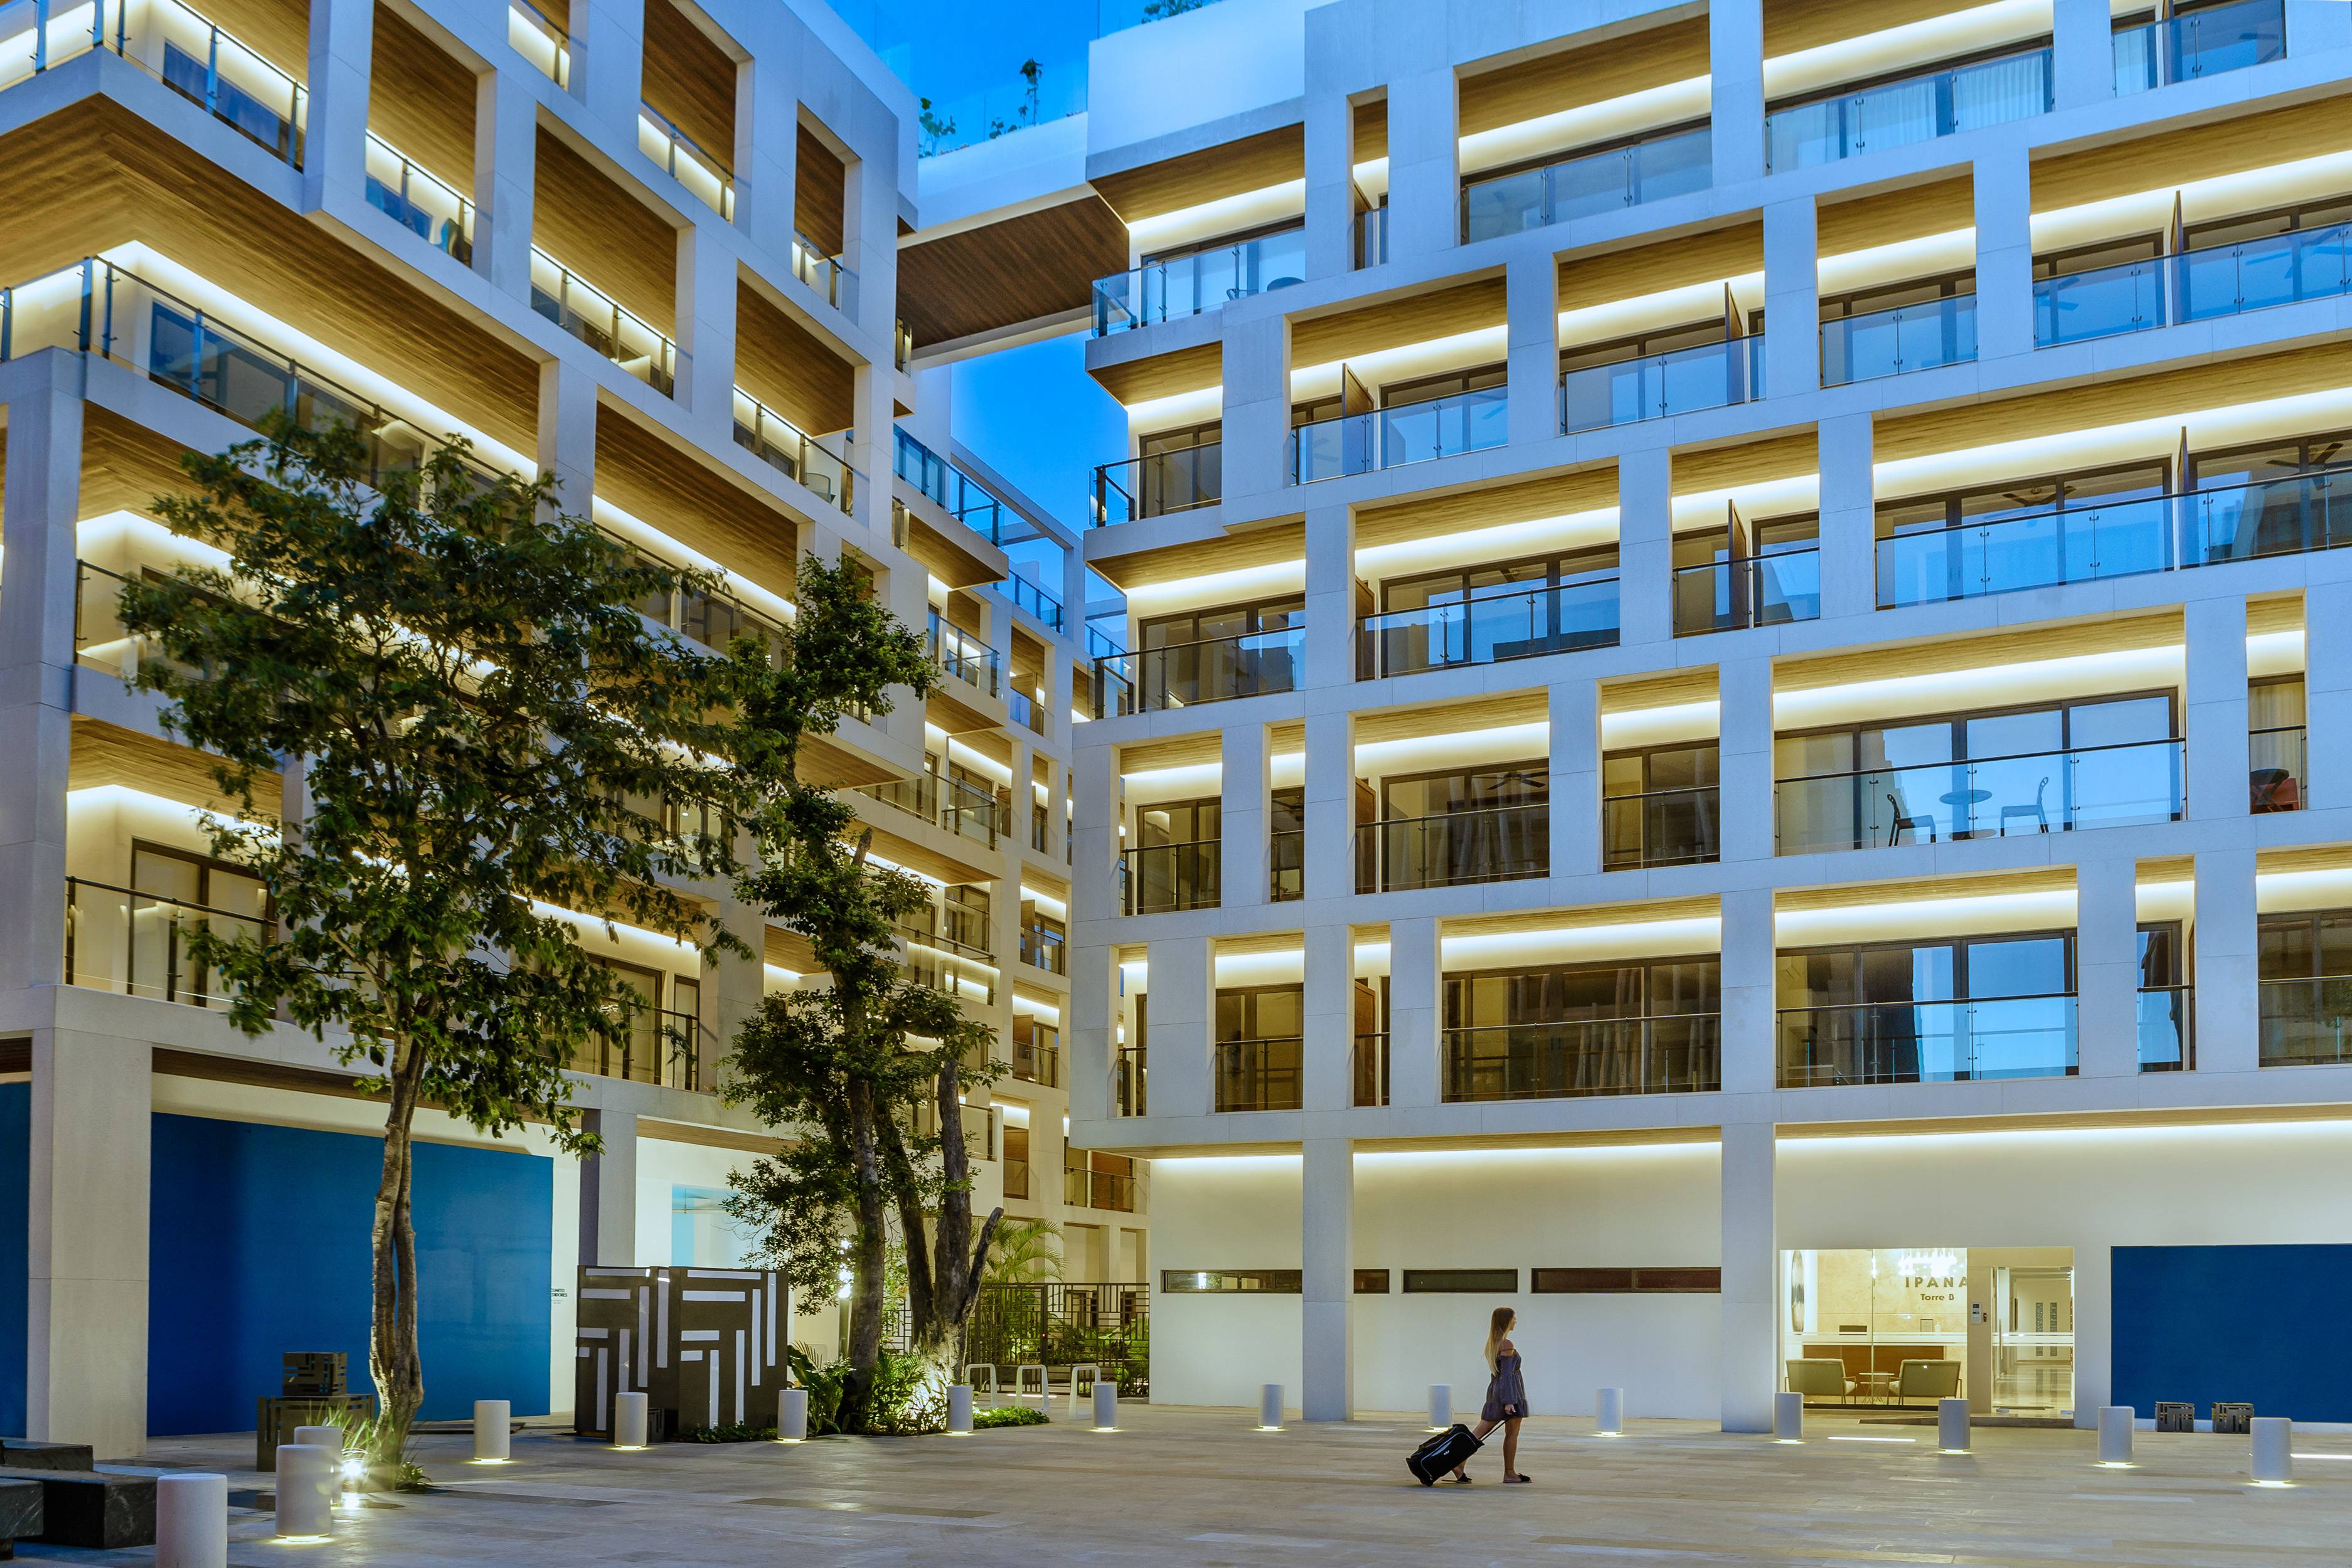 TULUM STYLE EXCLUSIVE: 2-BEDROOM, 2-BATHROOM + 2-BALCONIES, CORNER-UNIT, ON 38TH & 10TH WITH THE BEST LIFESTYLE AMENITIES IN PLAYA DEL CARMEN! - IPANA UNIT B-305